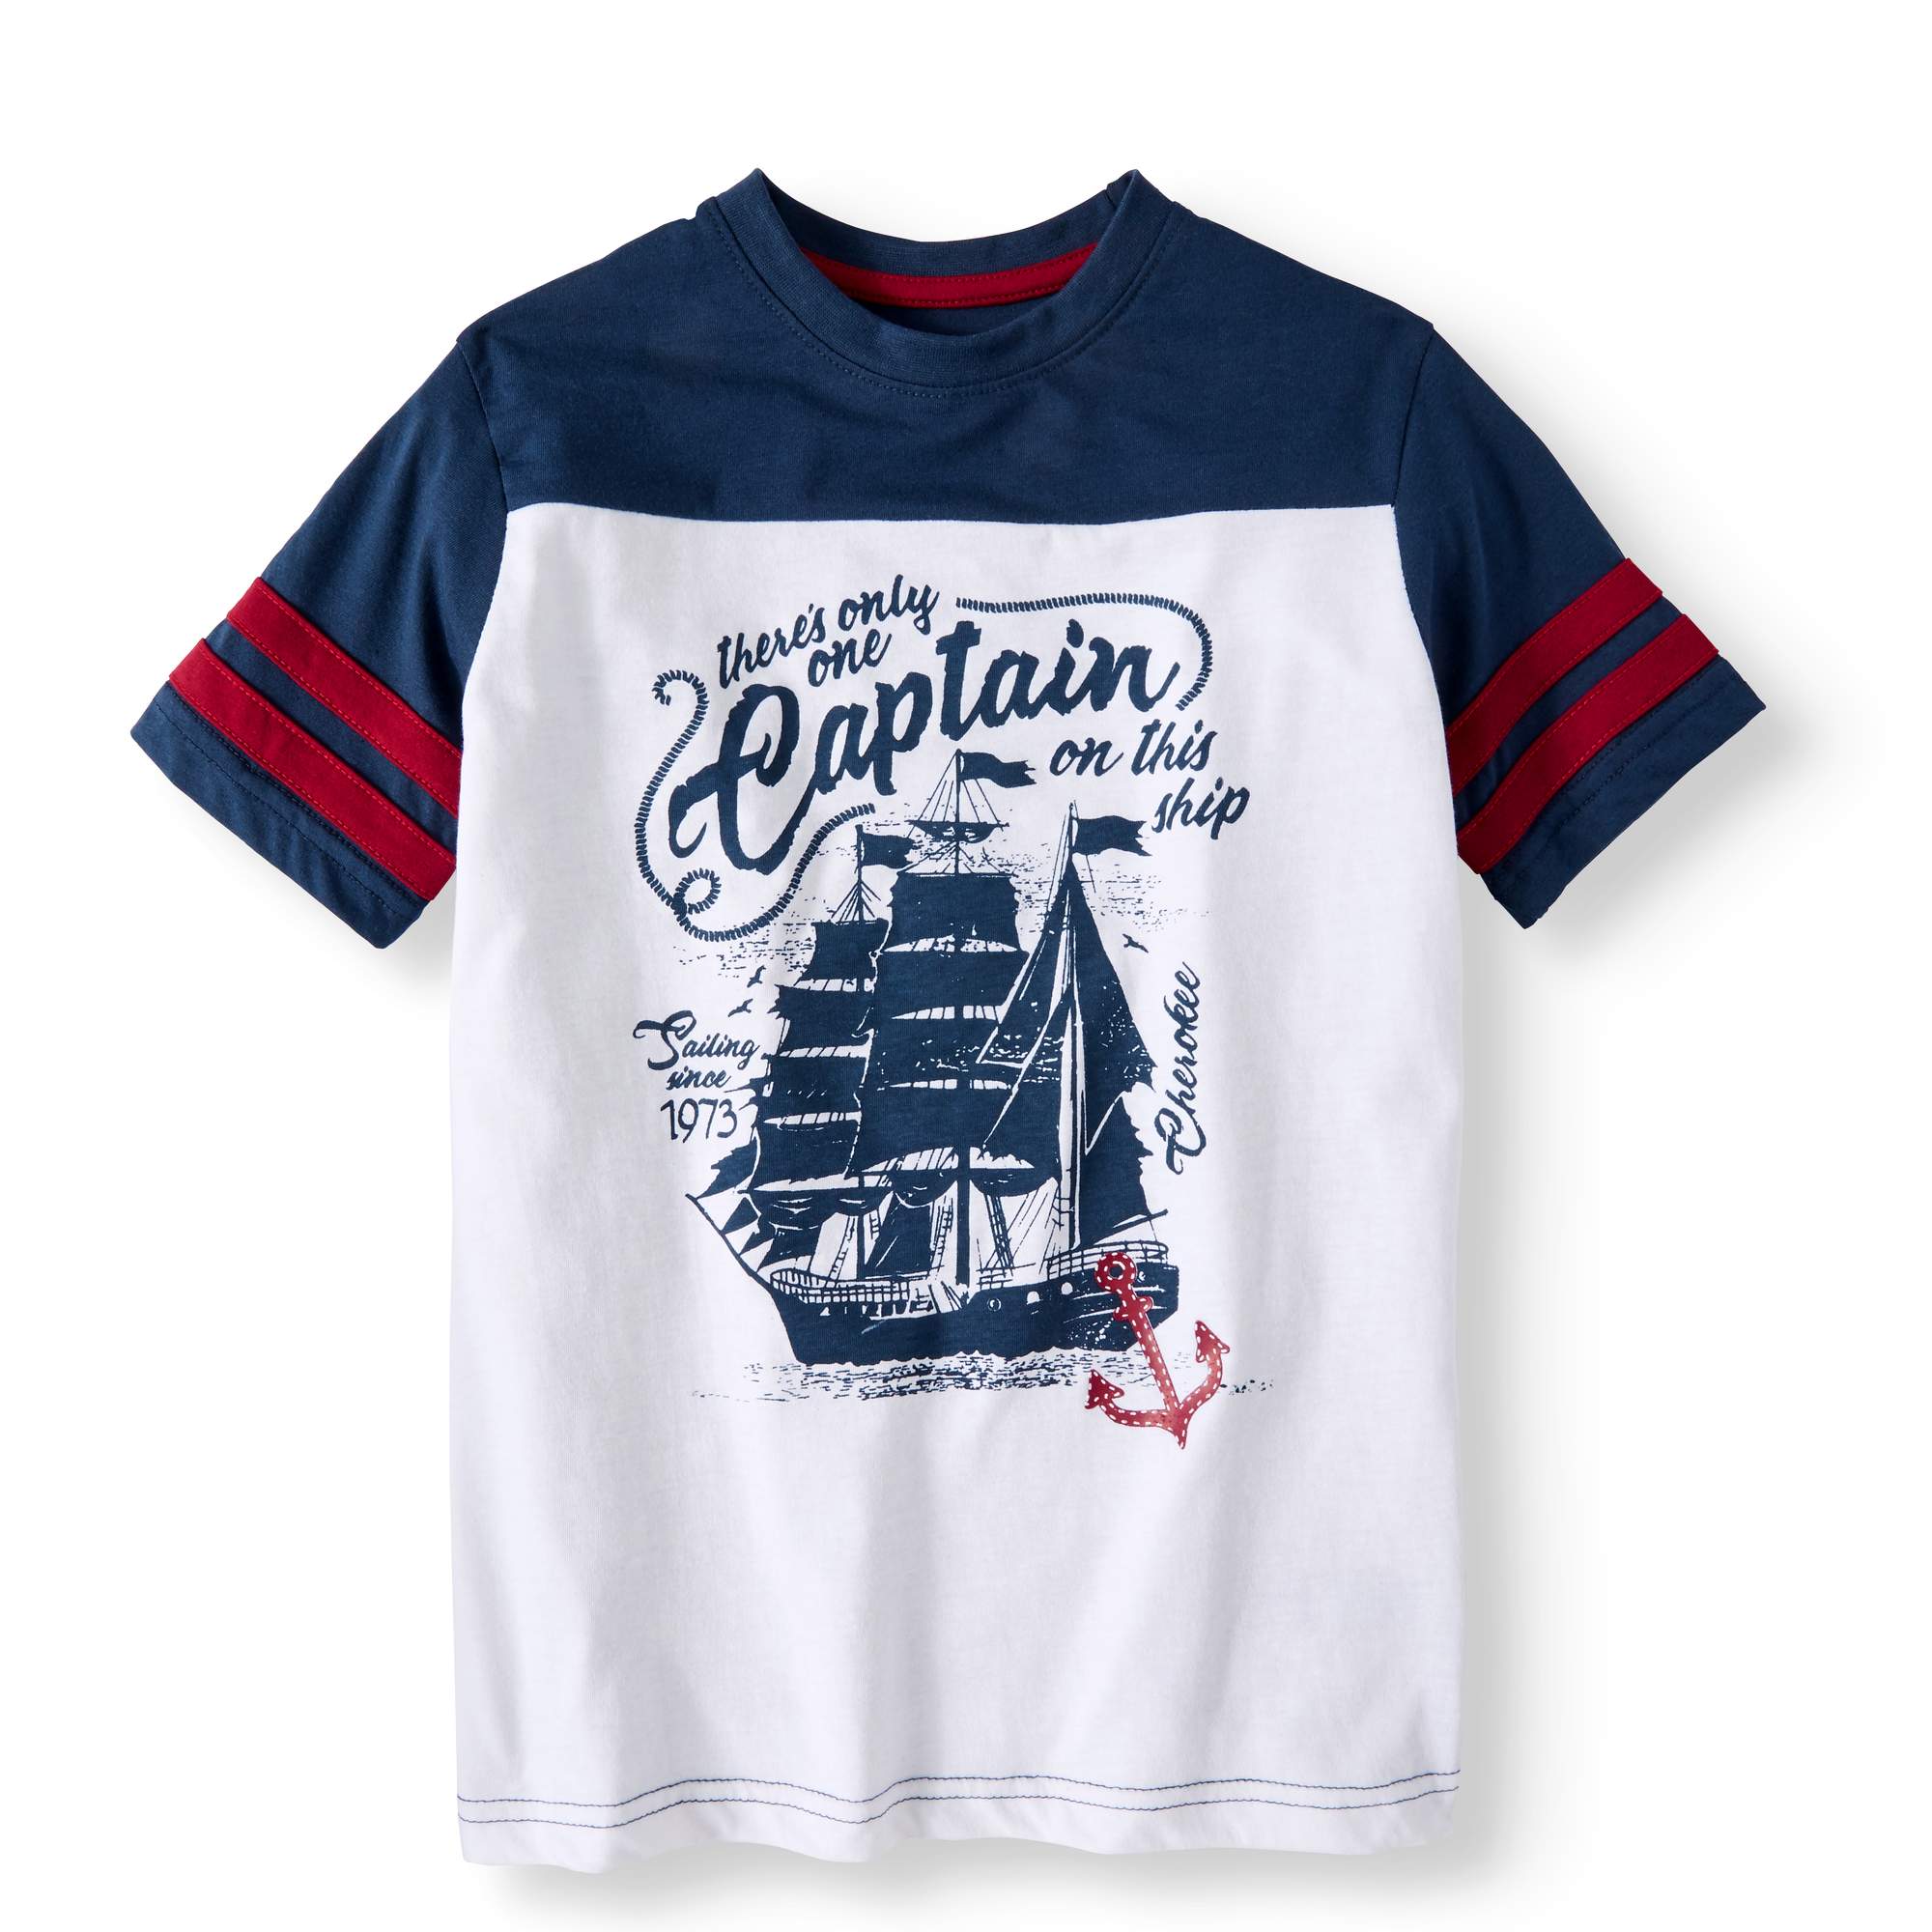 Boys' Graphic Football T-Shirt With Sleeve Stripes - image 1 of 3